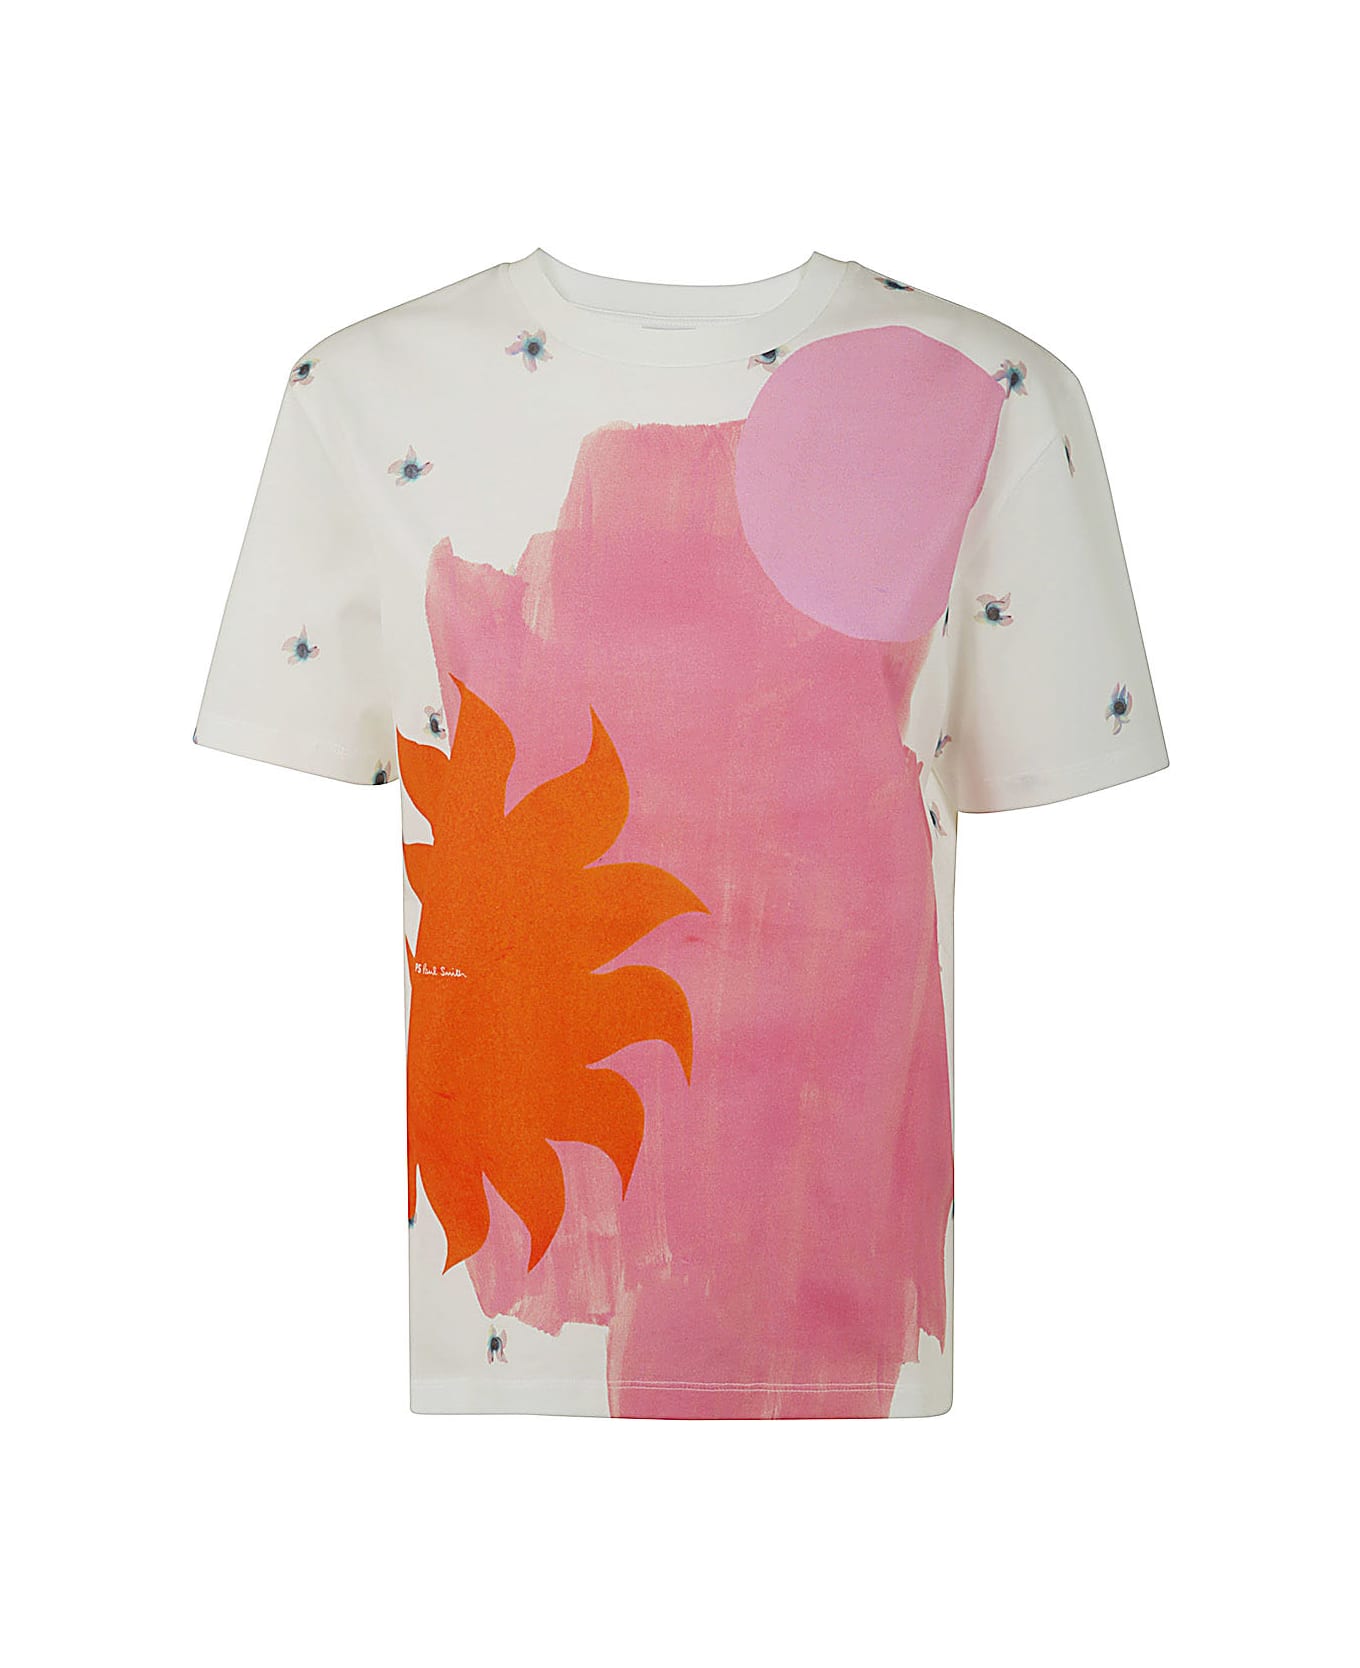 PS by Paul Smith T-shirt - White Tシャツ